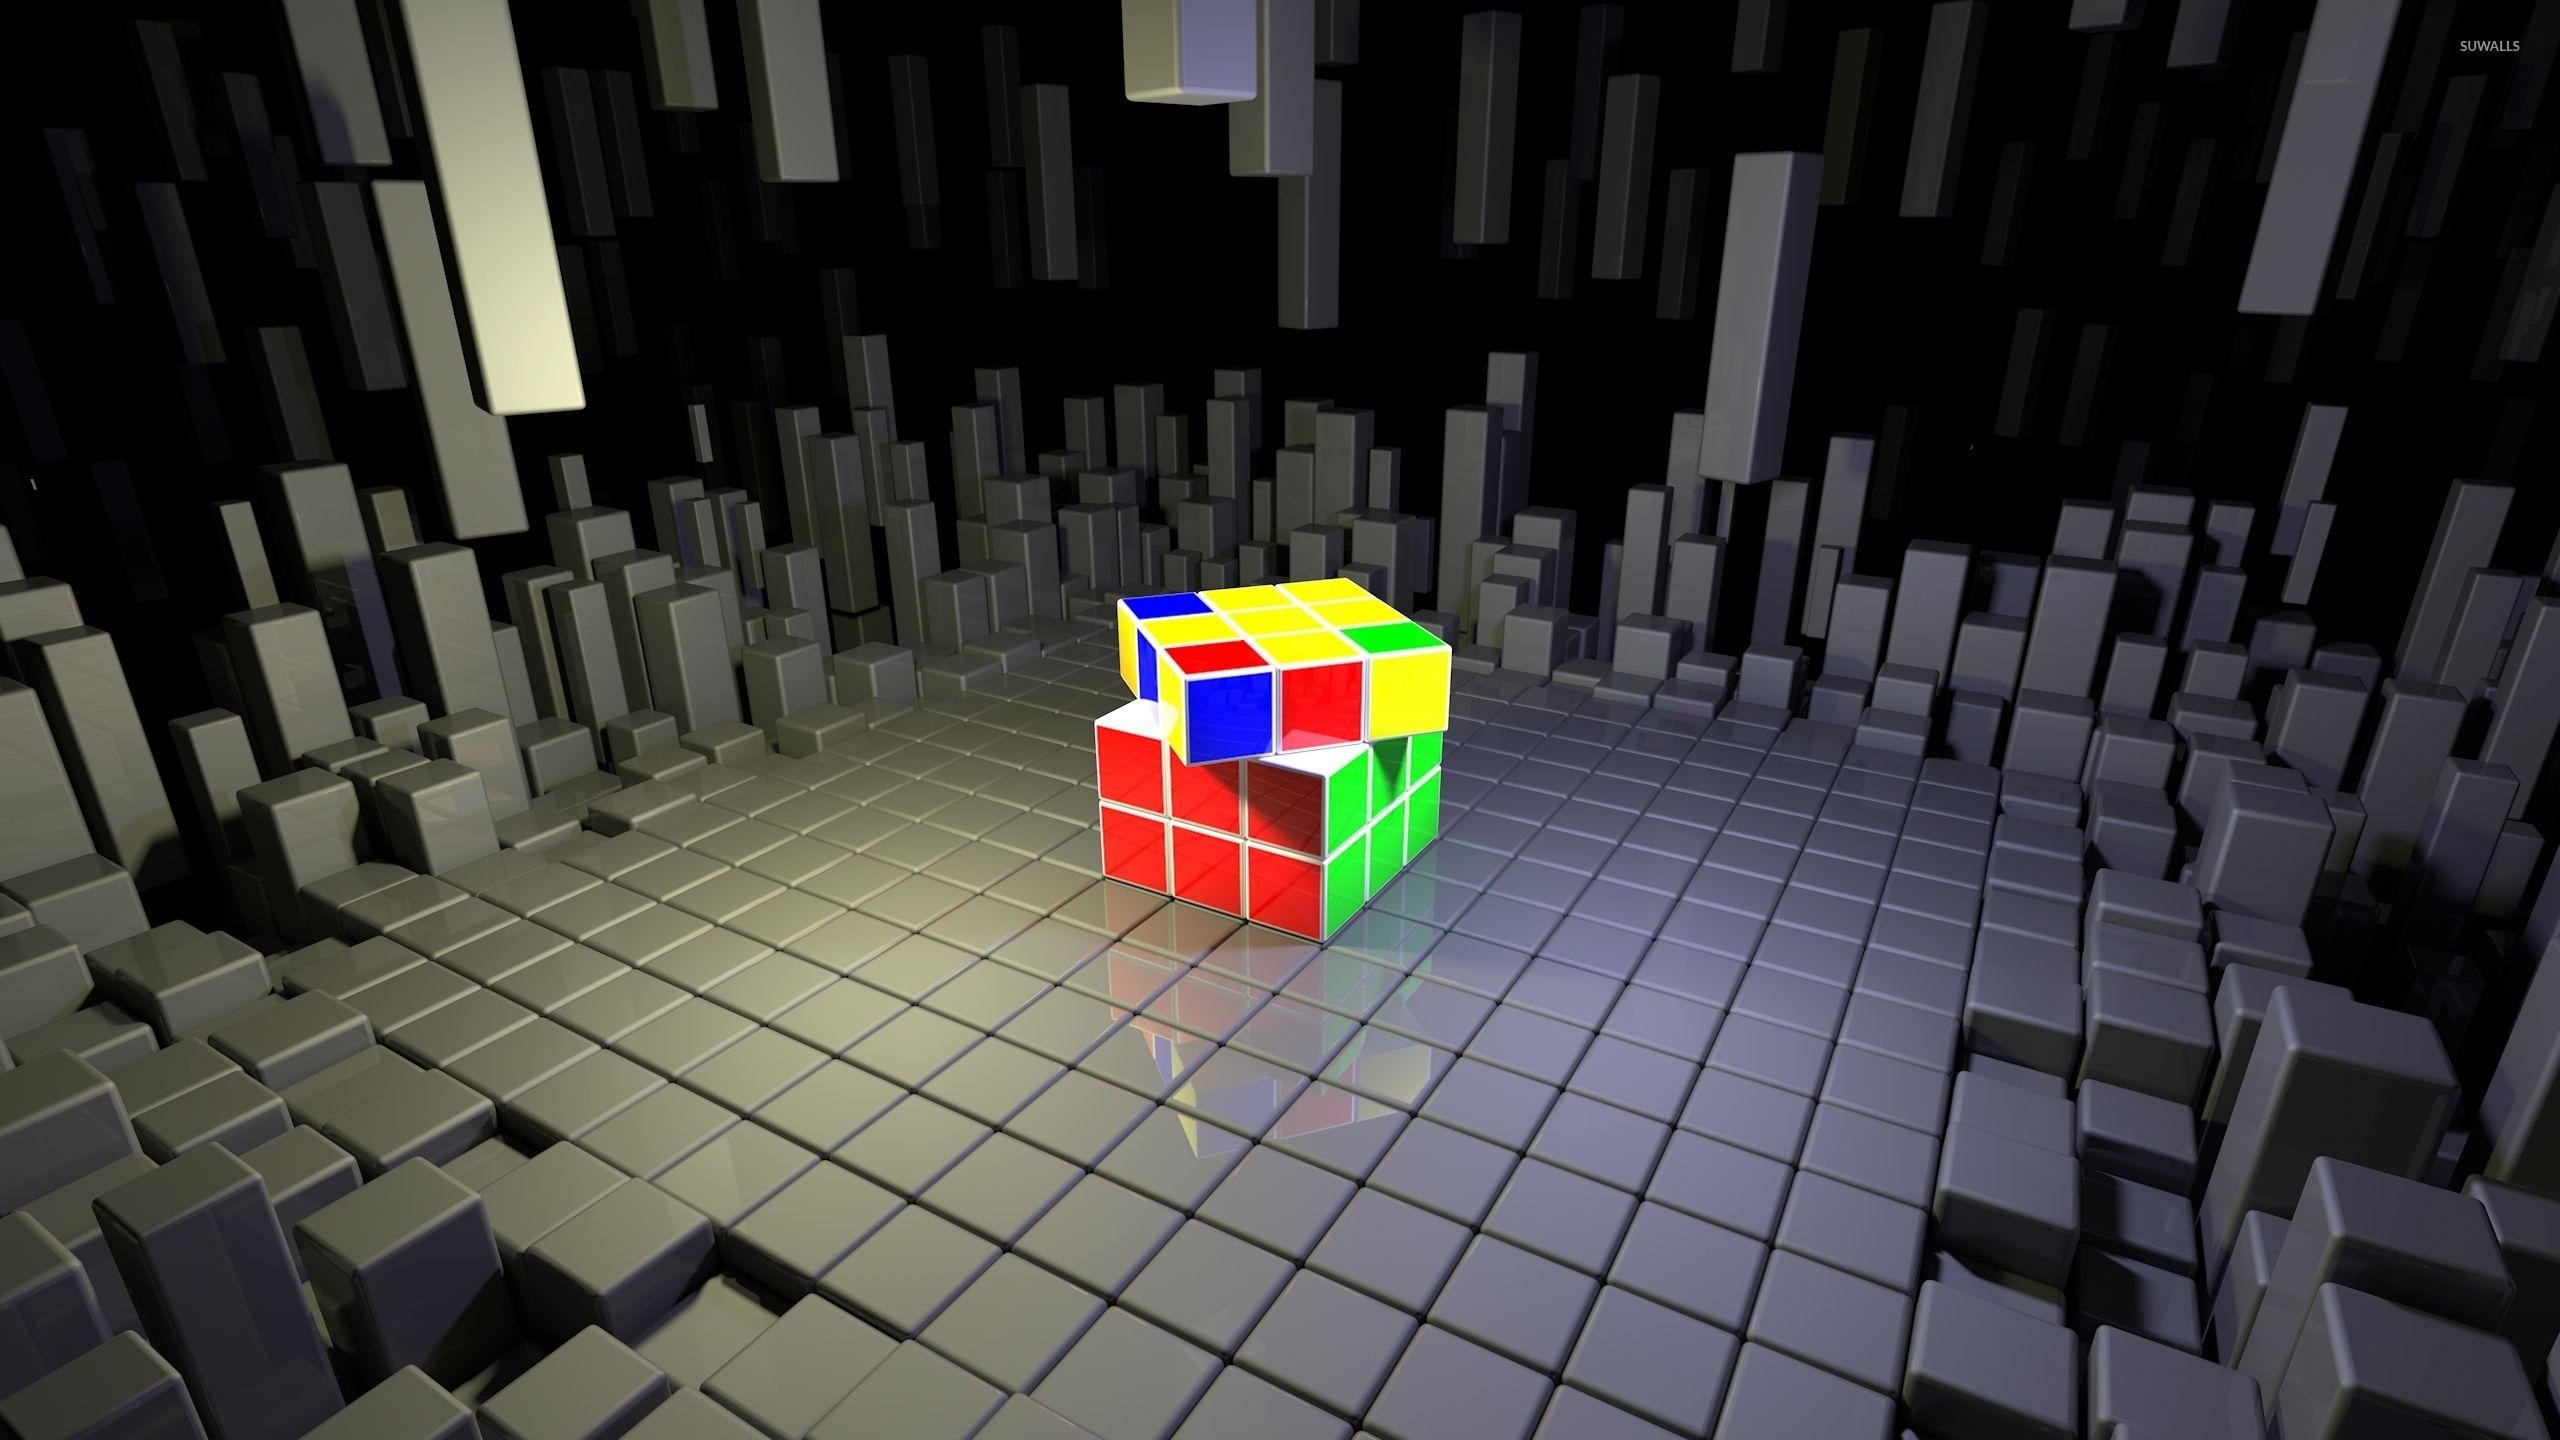 2560x1440 Rubik's Cube on top of gray cubes wallpaper - 3D wallpapers - #50972